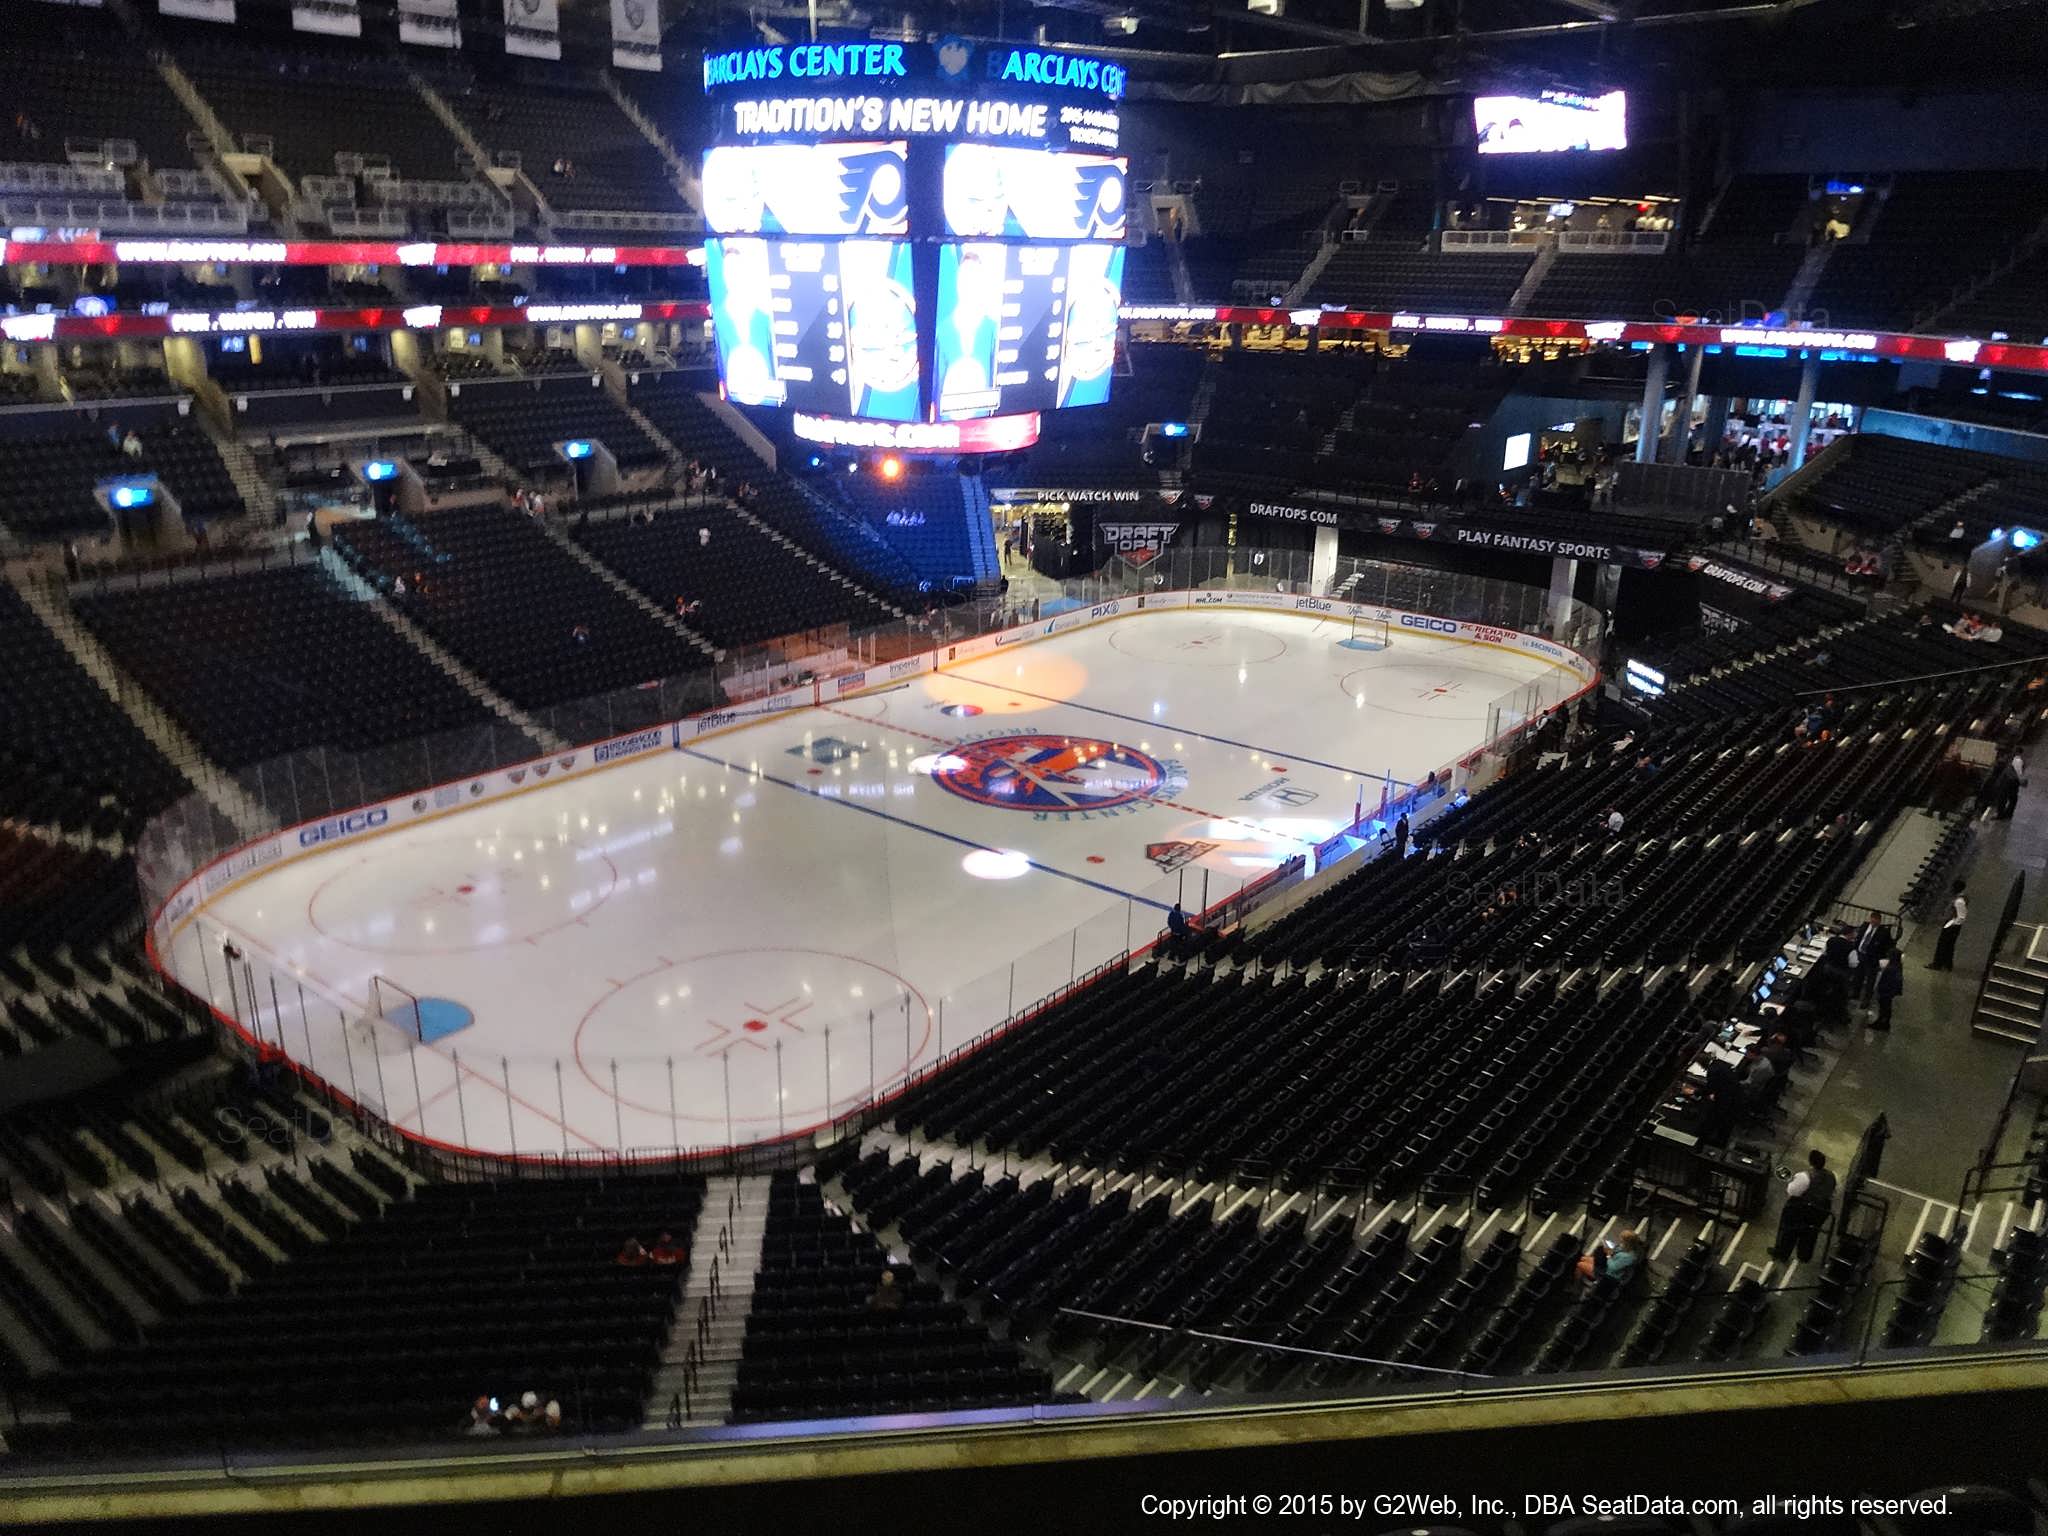 Seat View from Section 212 at the Barclays Center, home of the New York Islanders